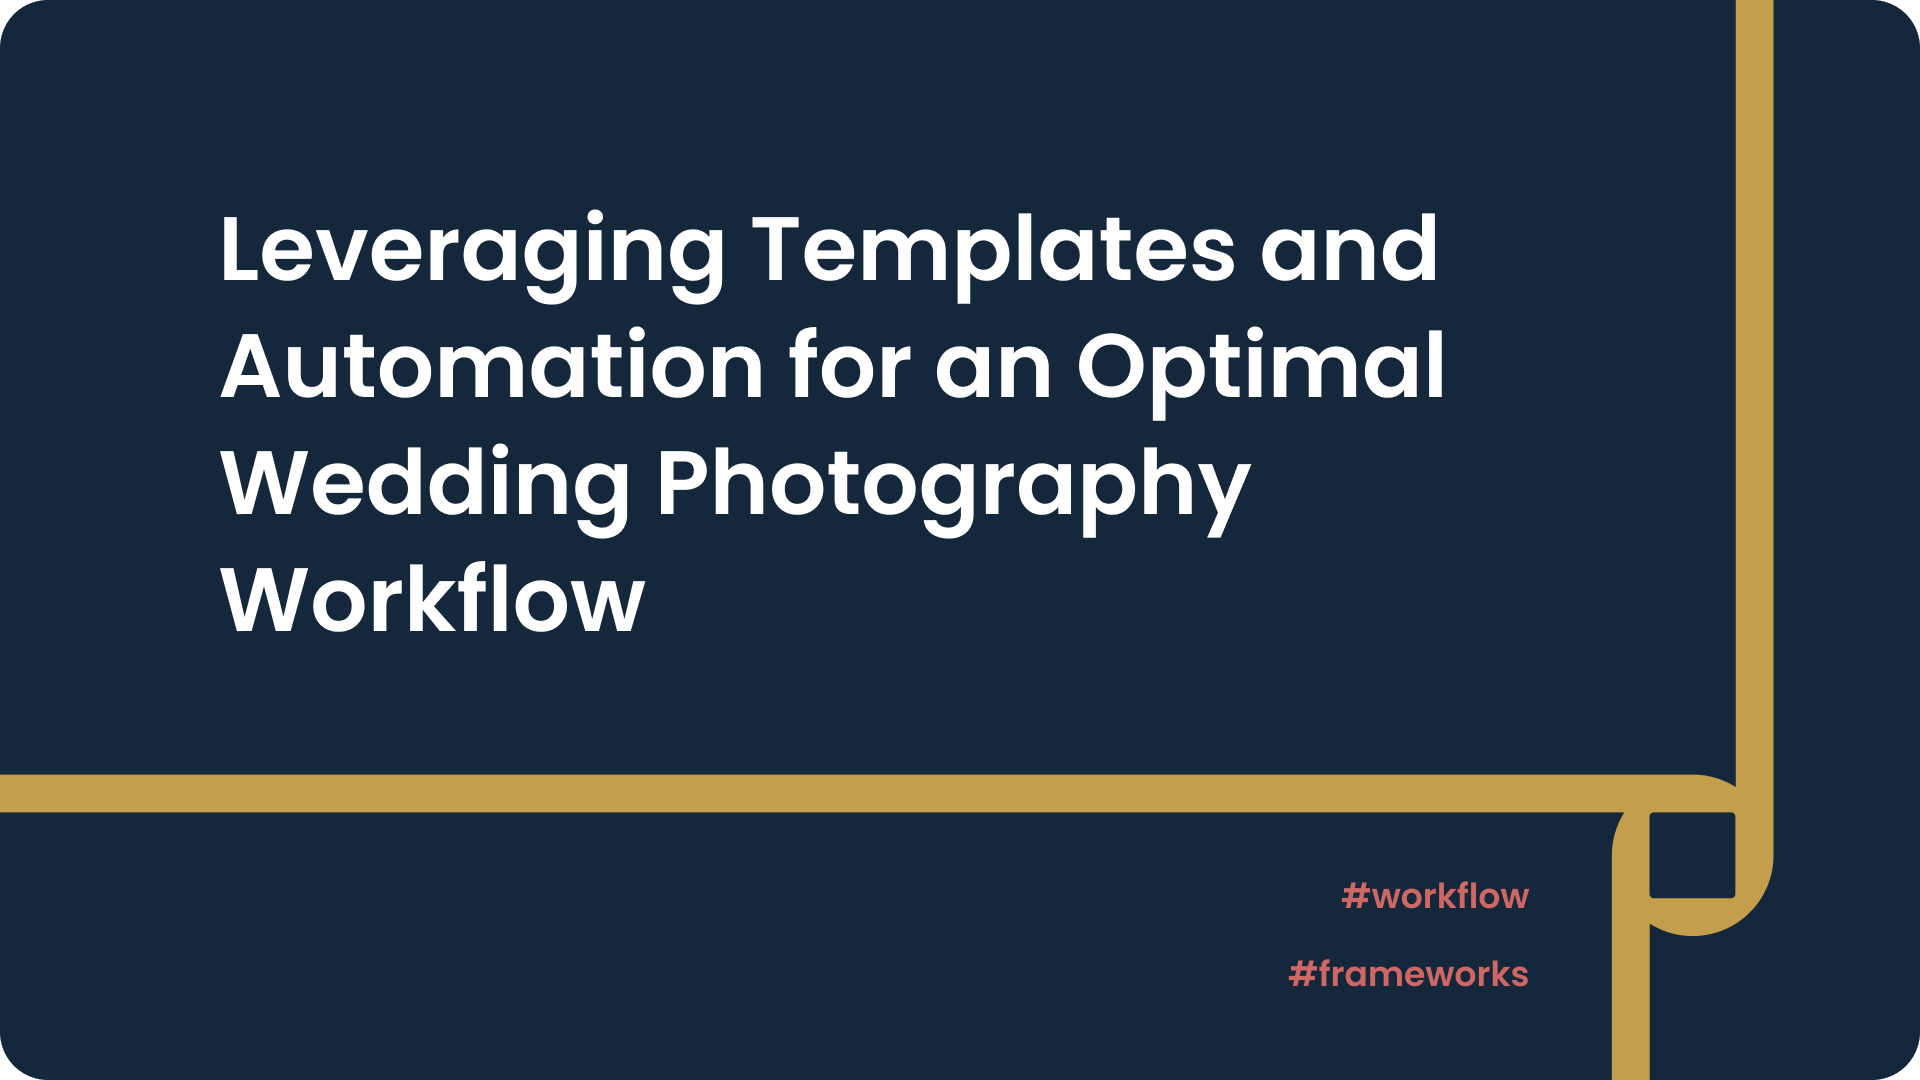 Leveraging Templates and Automation for an Optimal Wedding Photography Workflow